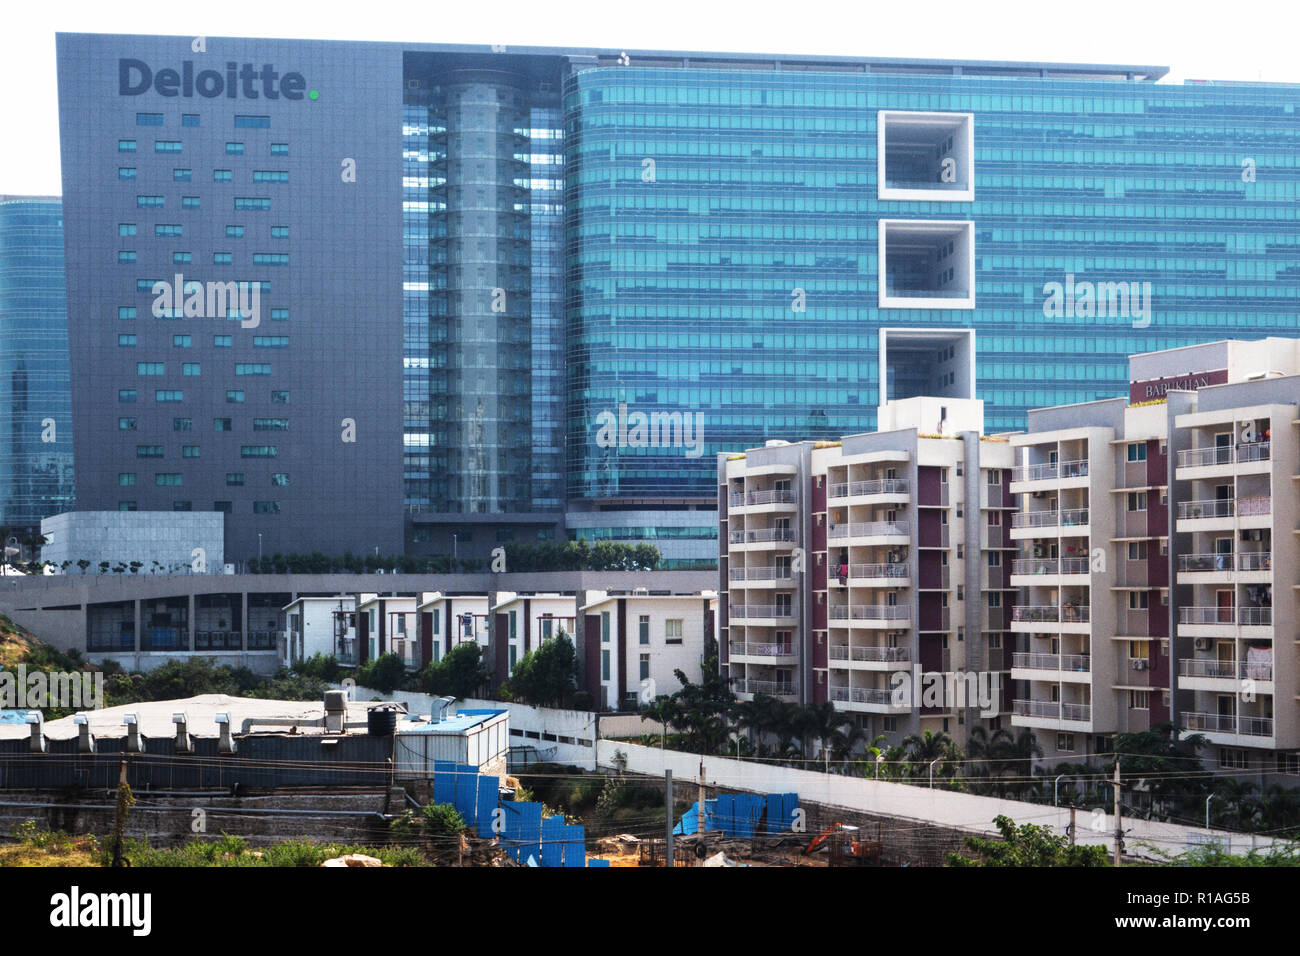 deloitte-deloitte-175-get-full-details-on-the-four-stages-of-the-application-process-with